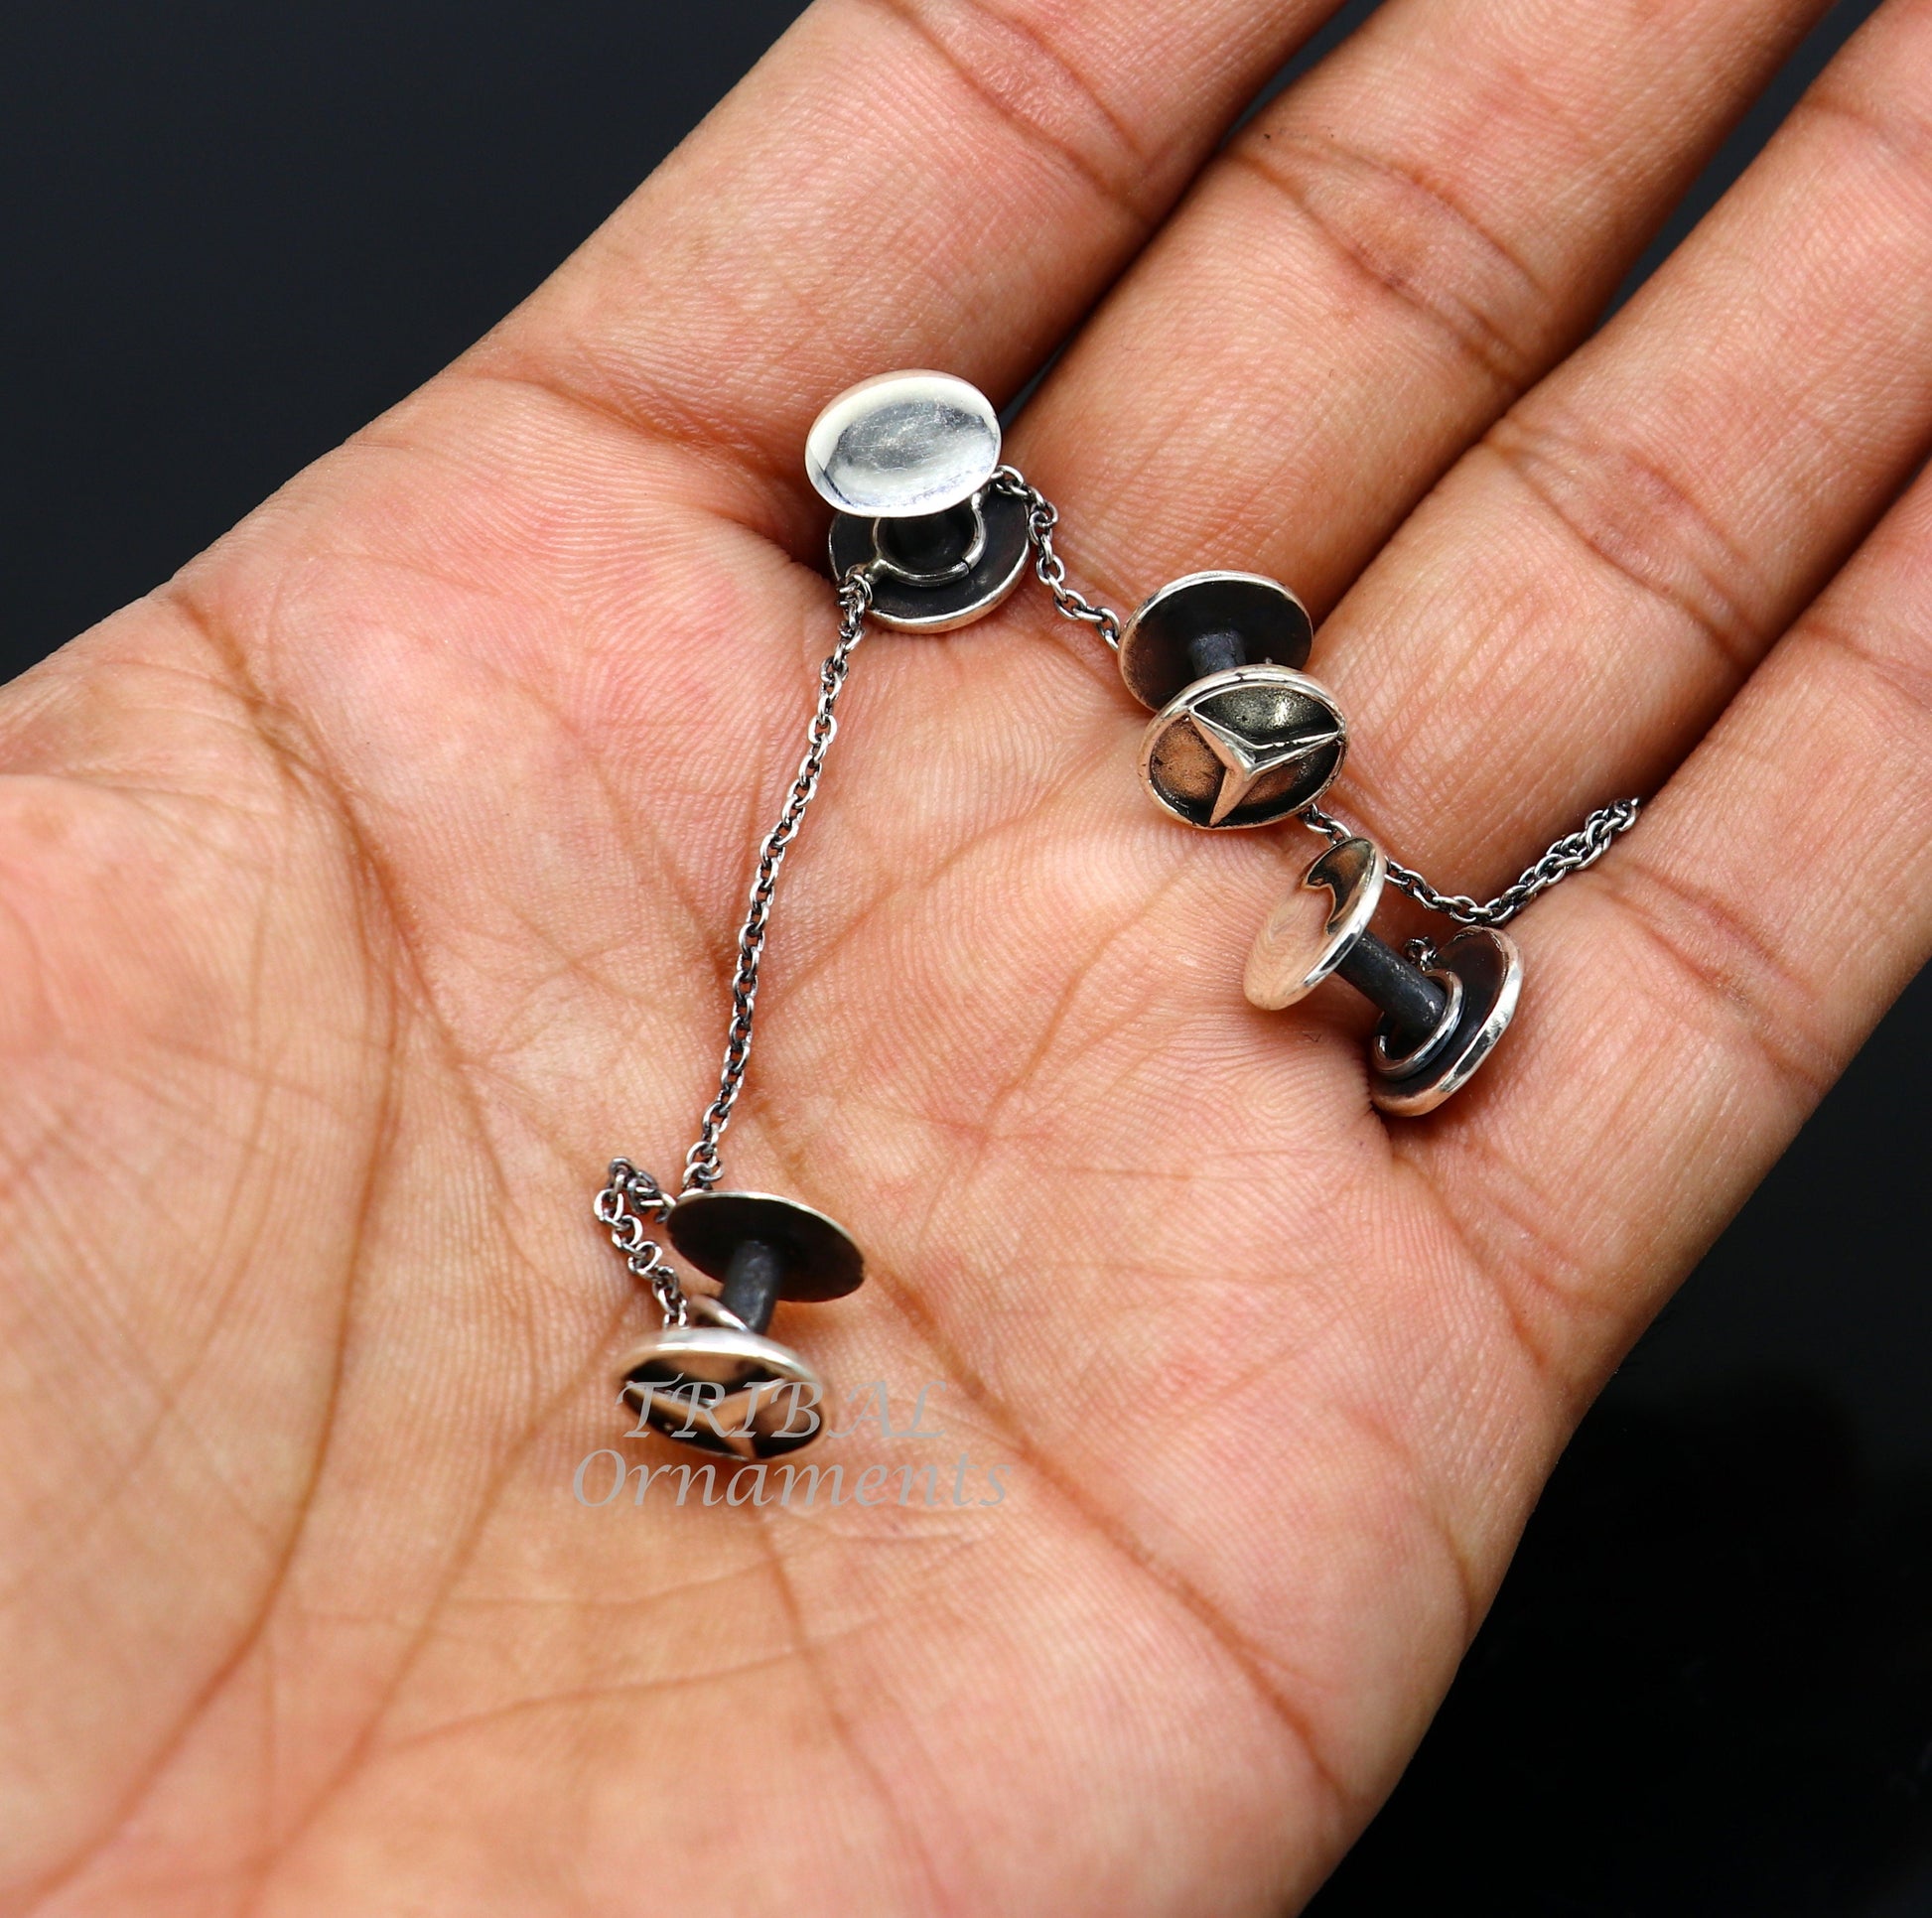 925 Sterling silver handmade amazing star design buttons or cufflinks for men's kurta, best gifting jewelry occasions btn07 - TRIBAL ORNAMENTS